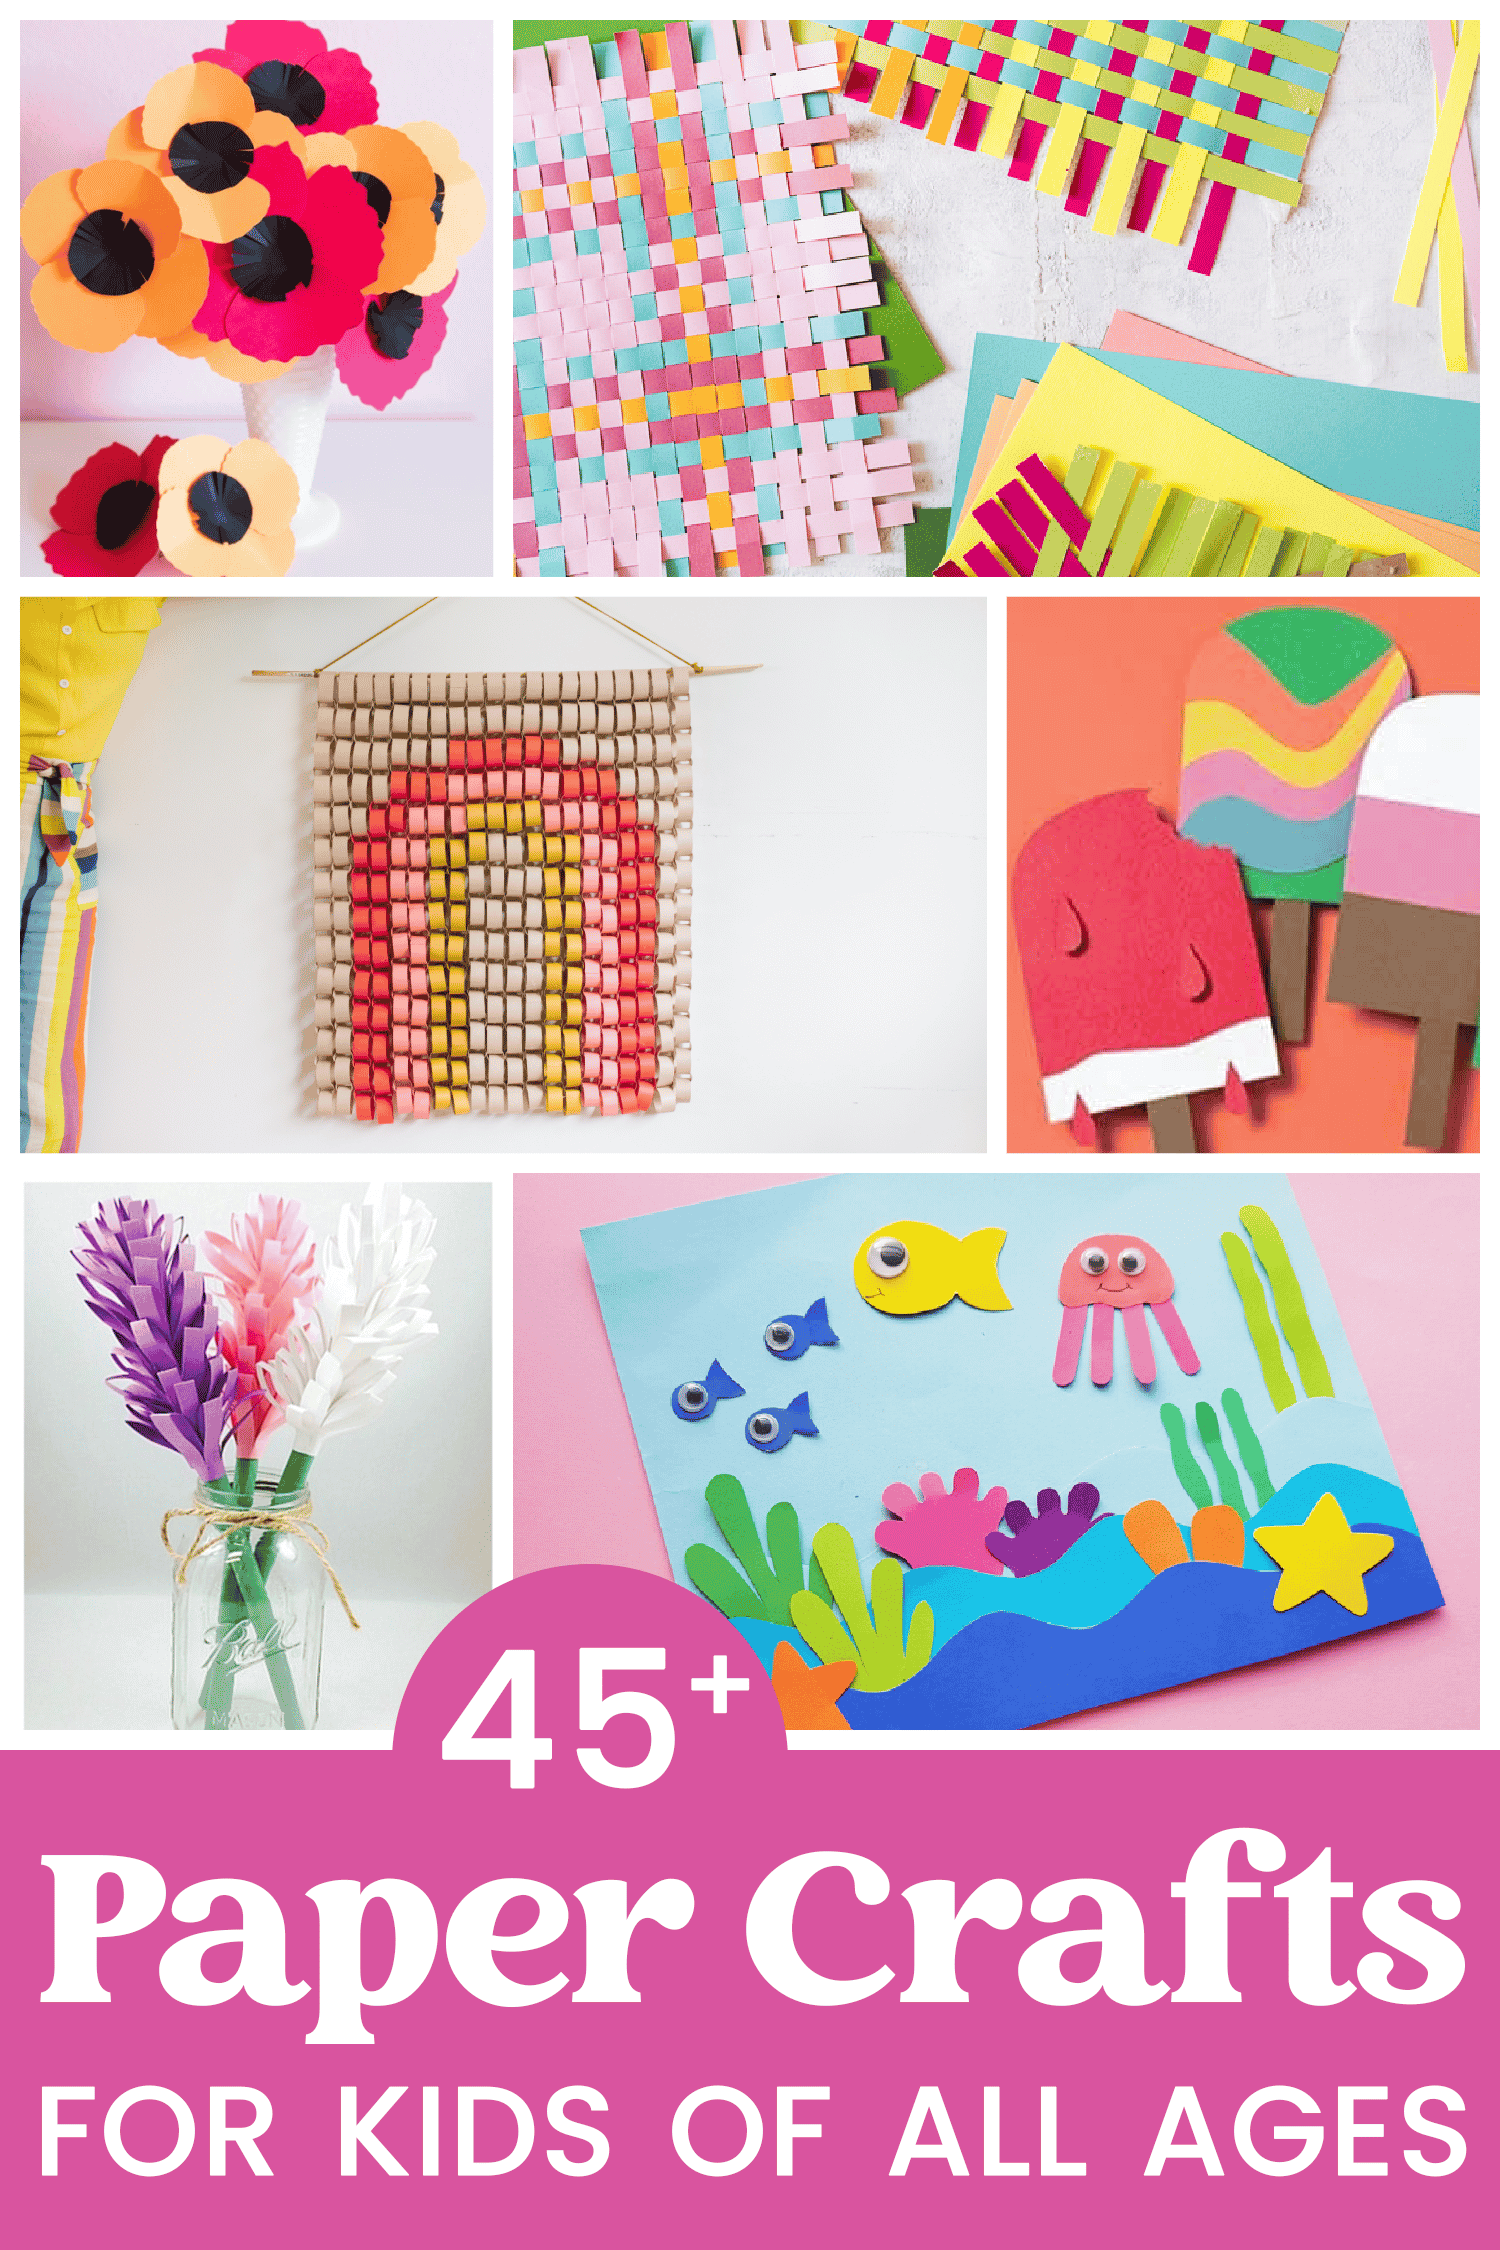 Collage of Construction Paper Craft Ideas with "45+ Paper Crafts for Kids" text